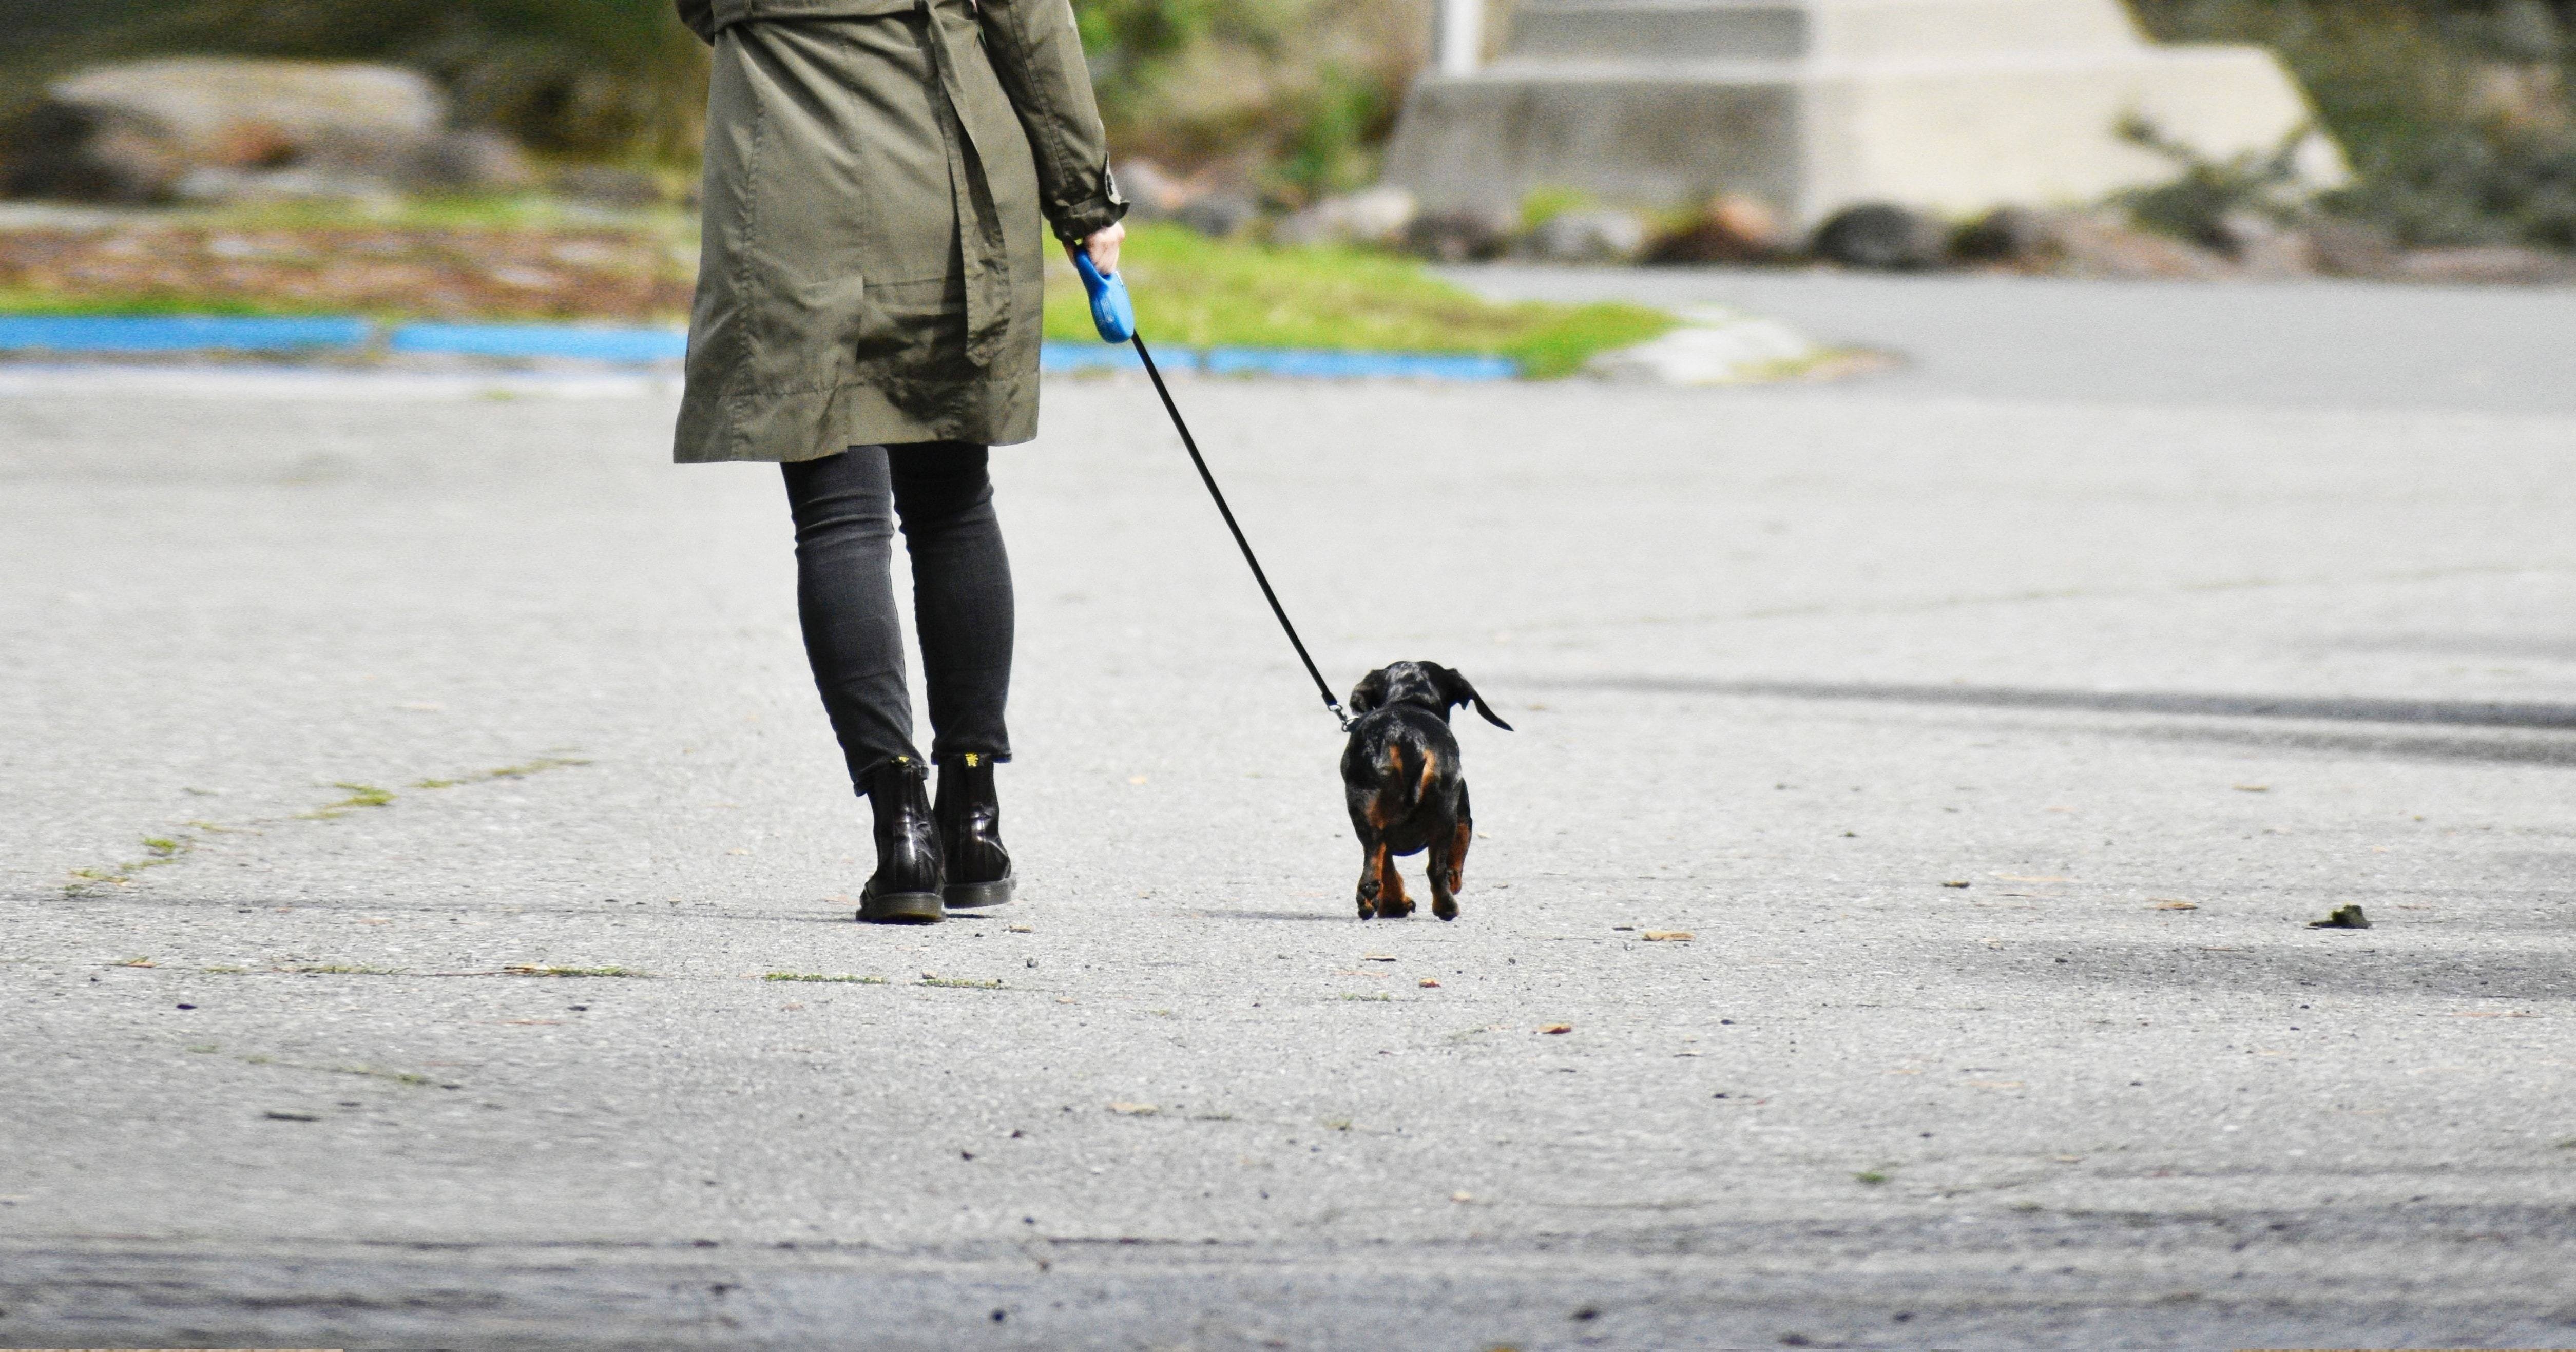 Different Types of Dog Leashes: How To Pick The Best Dog Training Leash?